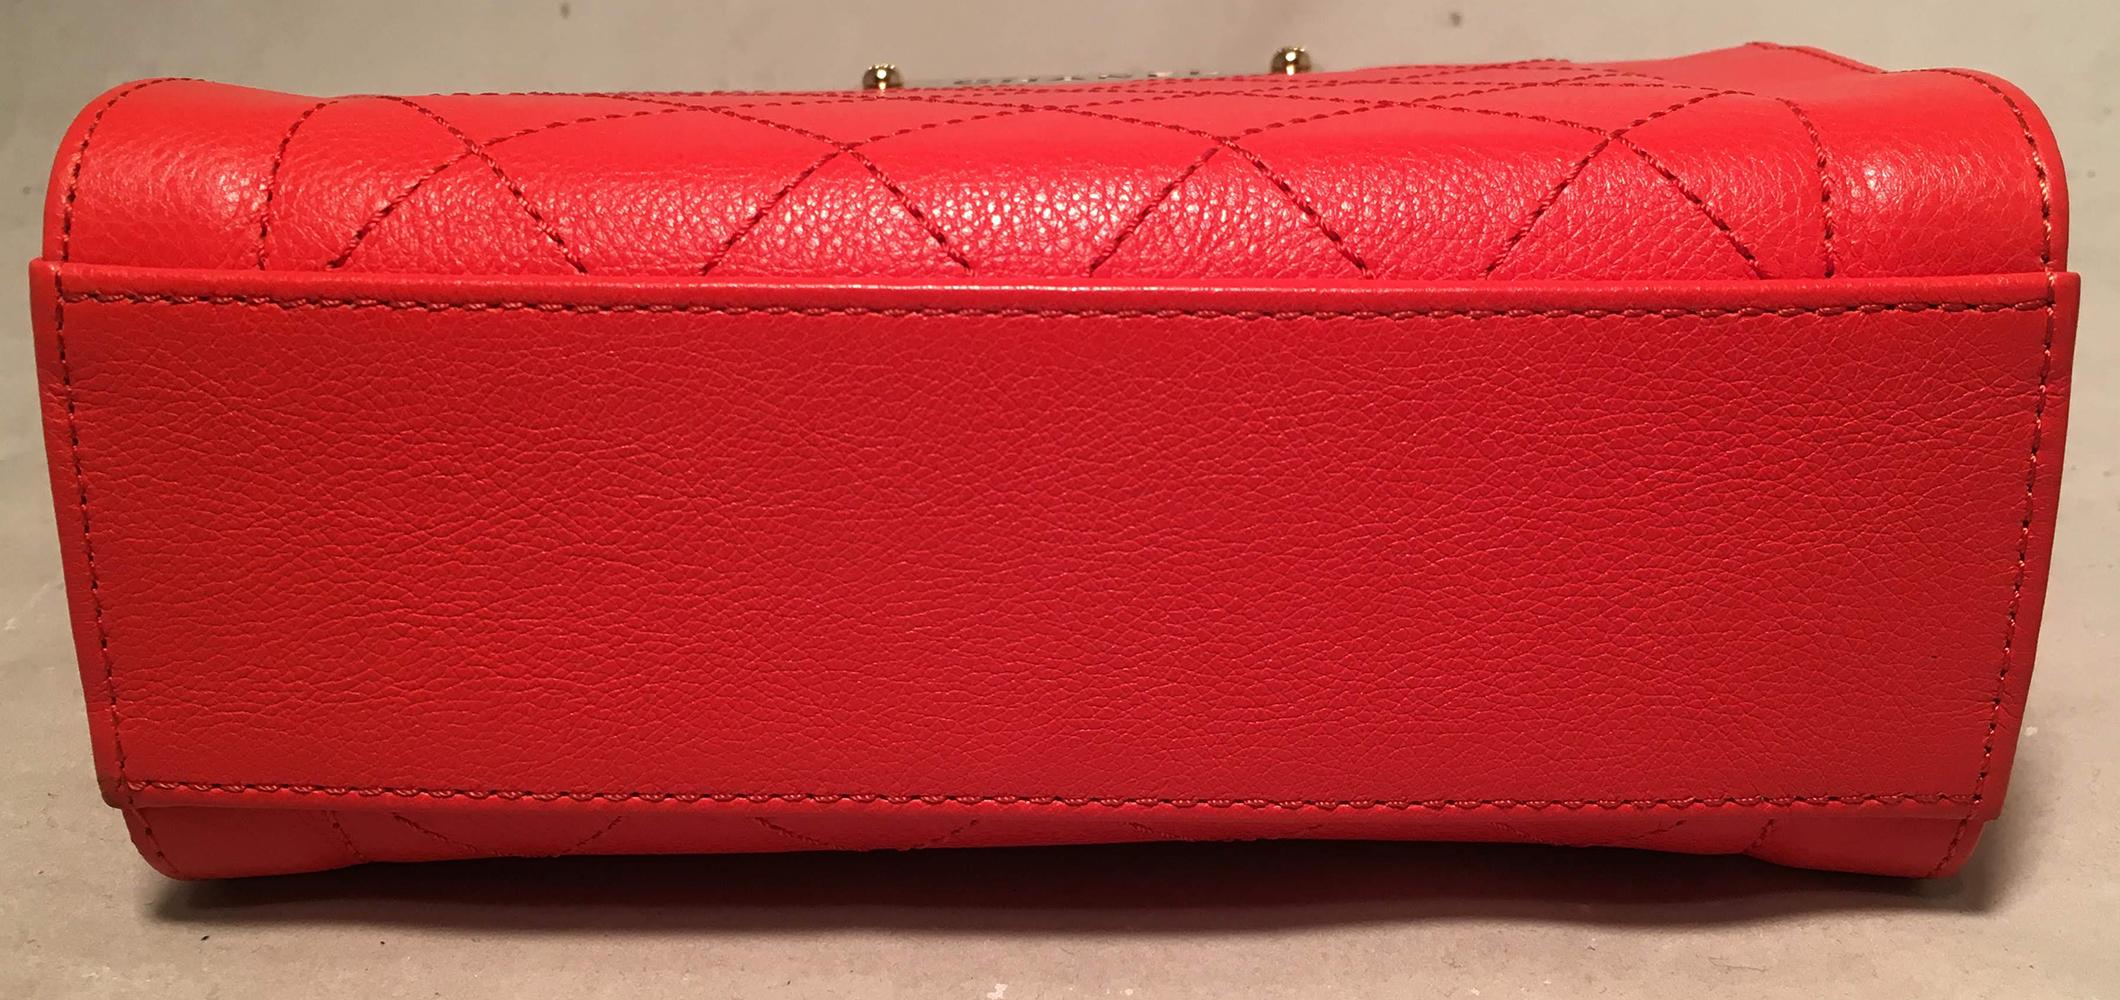 Women's Chanel Red Quilted Leather Mini Shopping Tote Bag